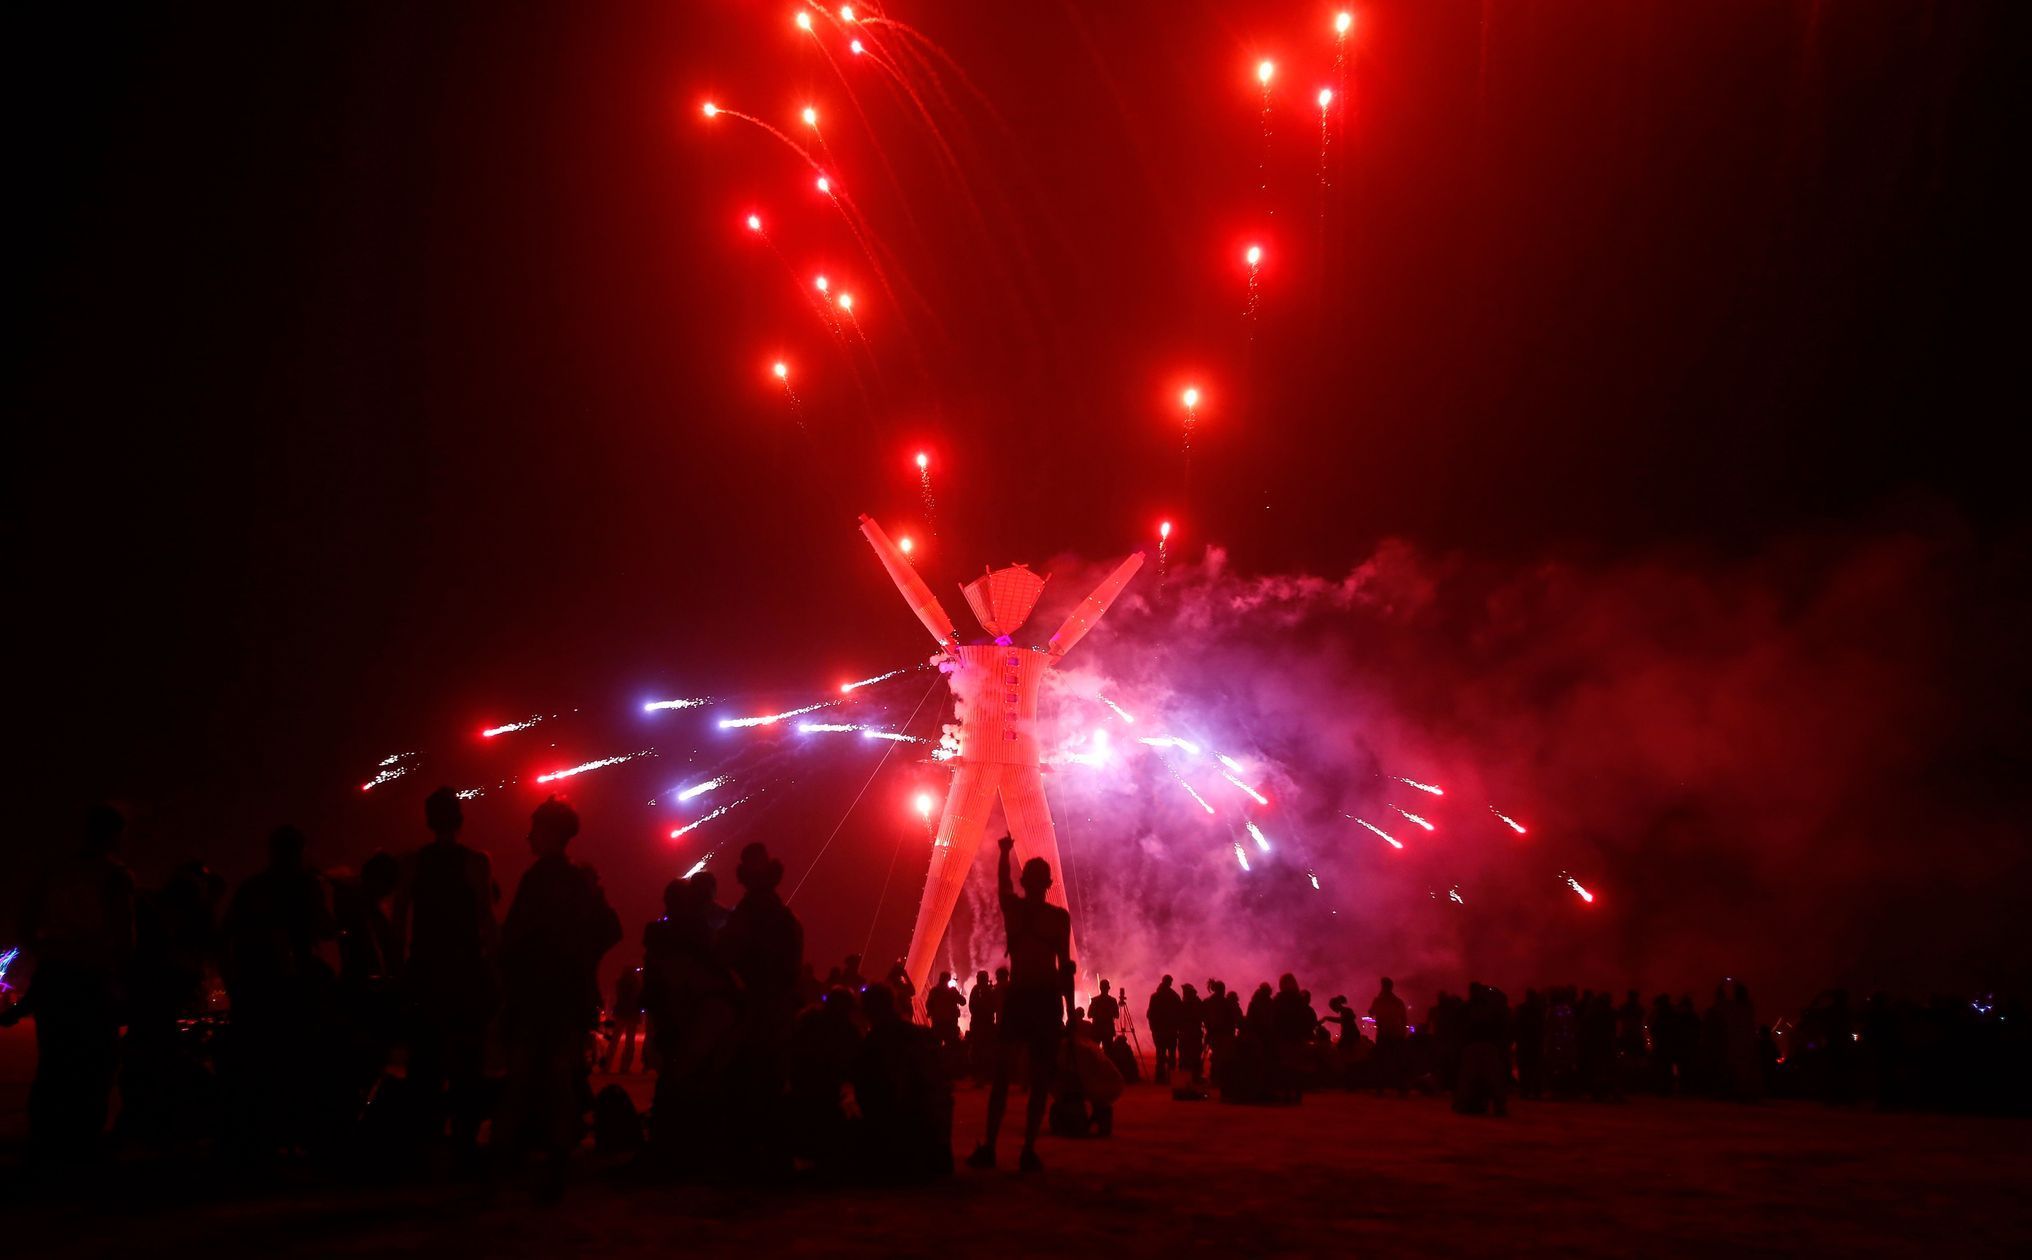 Fireworks are seen before the Man burns during the Burning Man 2014 &quot;Caravansary&quot; arts and music festival in the Black Rock Desert of Nevada